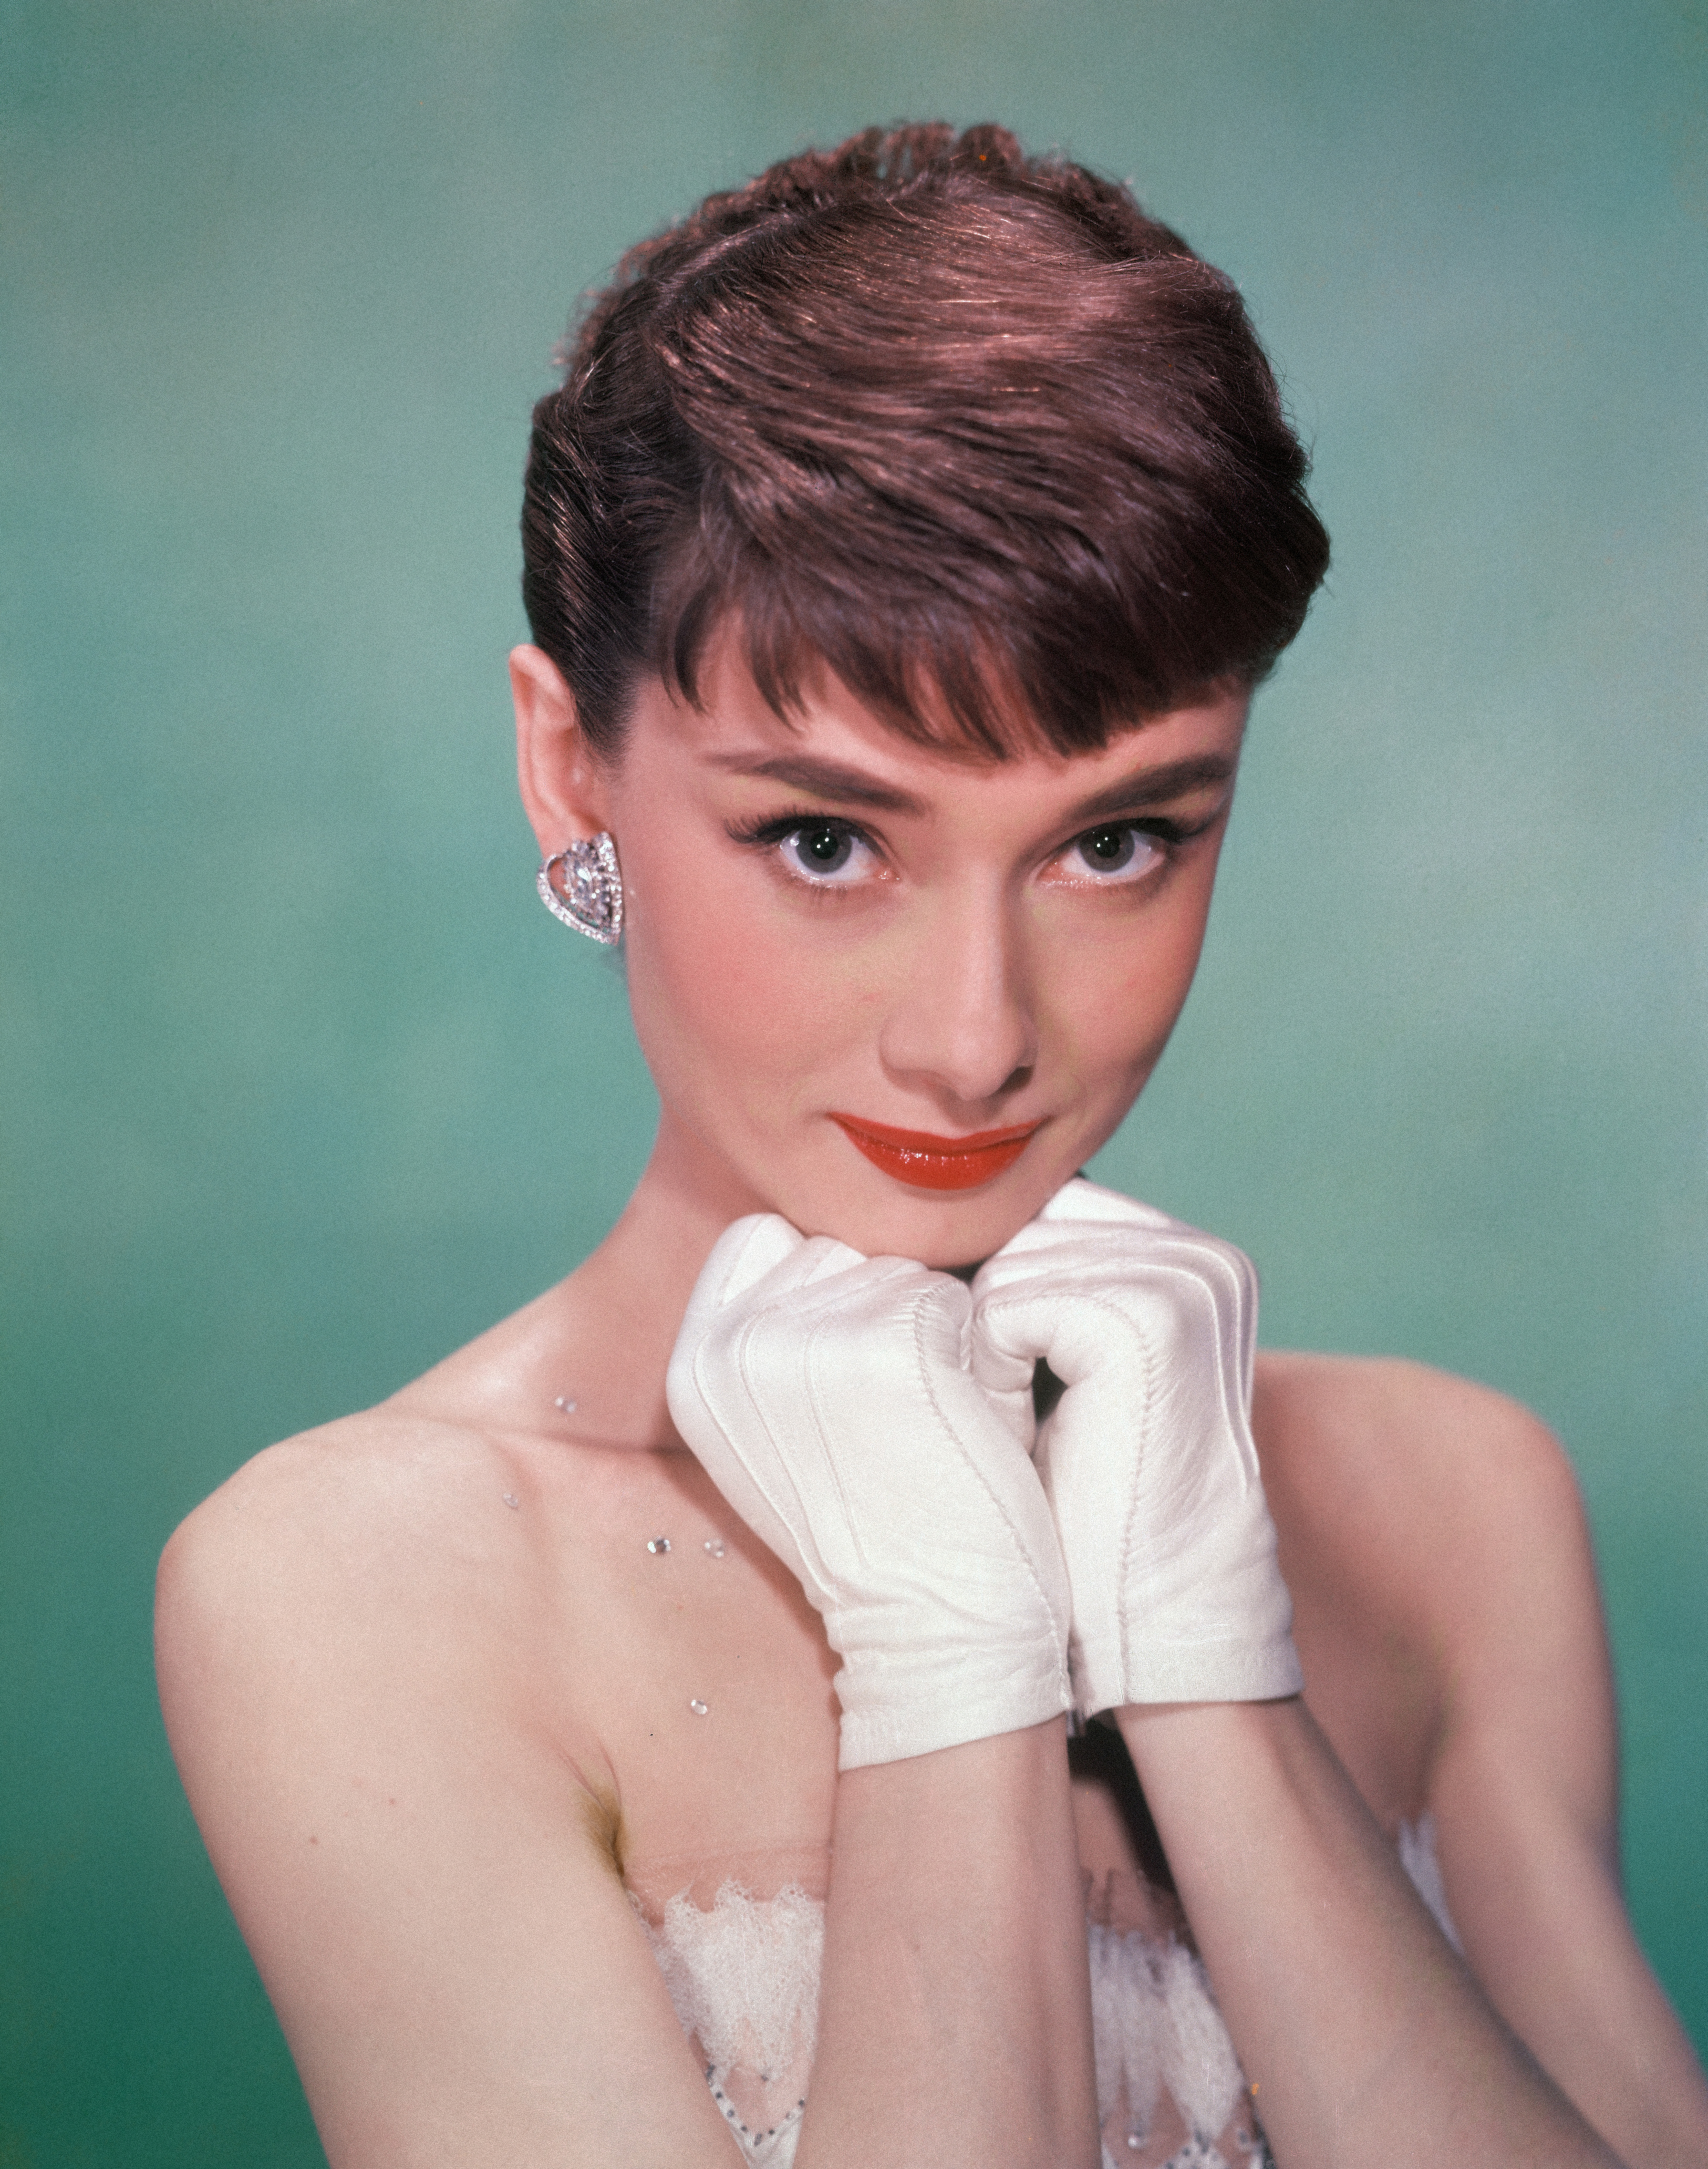 Audrey Hepburn in the 1950s | Source: Getty Images